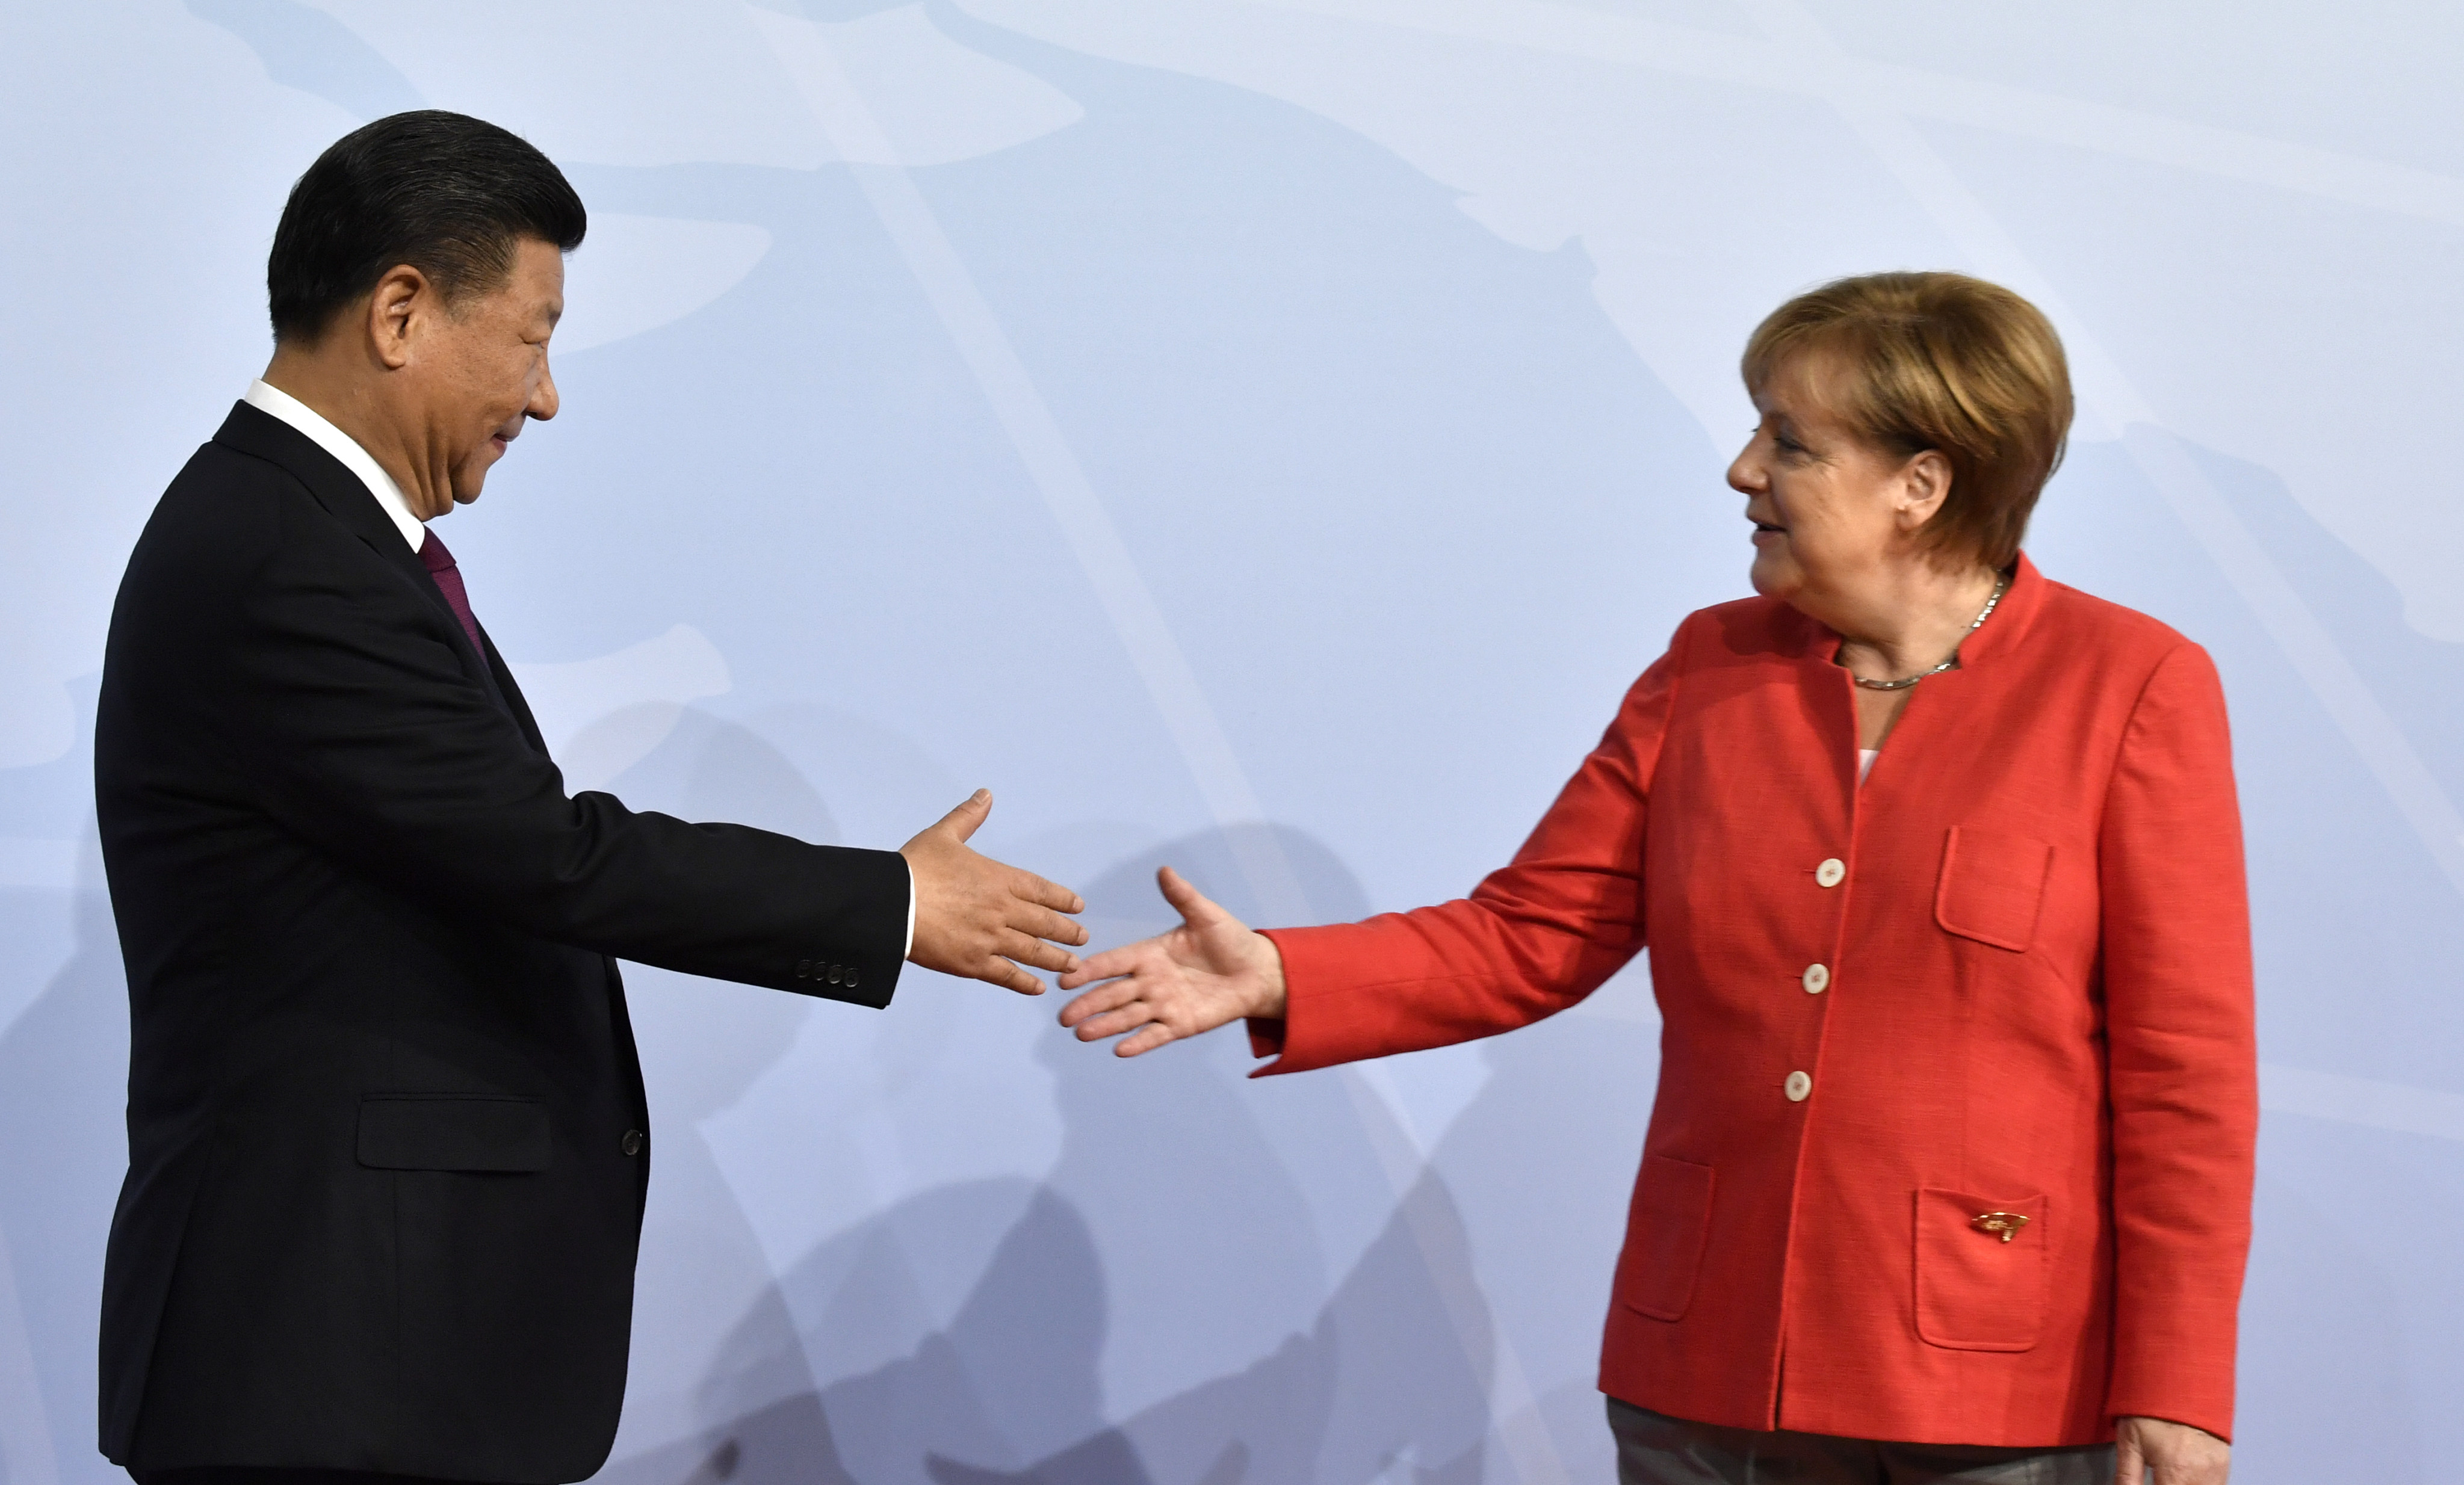 President Xi Jinping greets German Chancellor Angela Merkel at the Group of 20 summit in Hamburg, Germany, in 2017. Photo: Getty Images